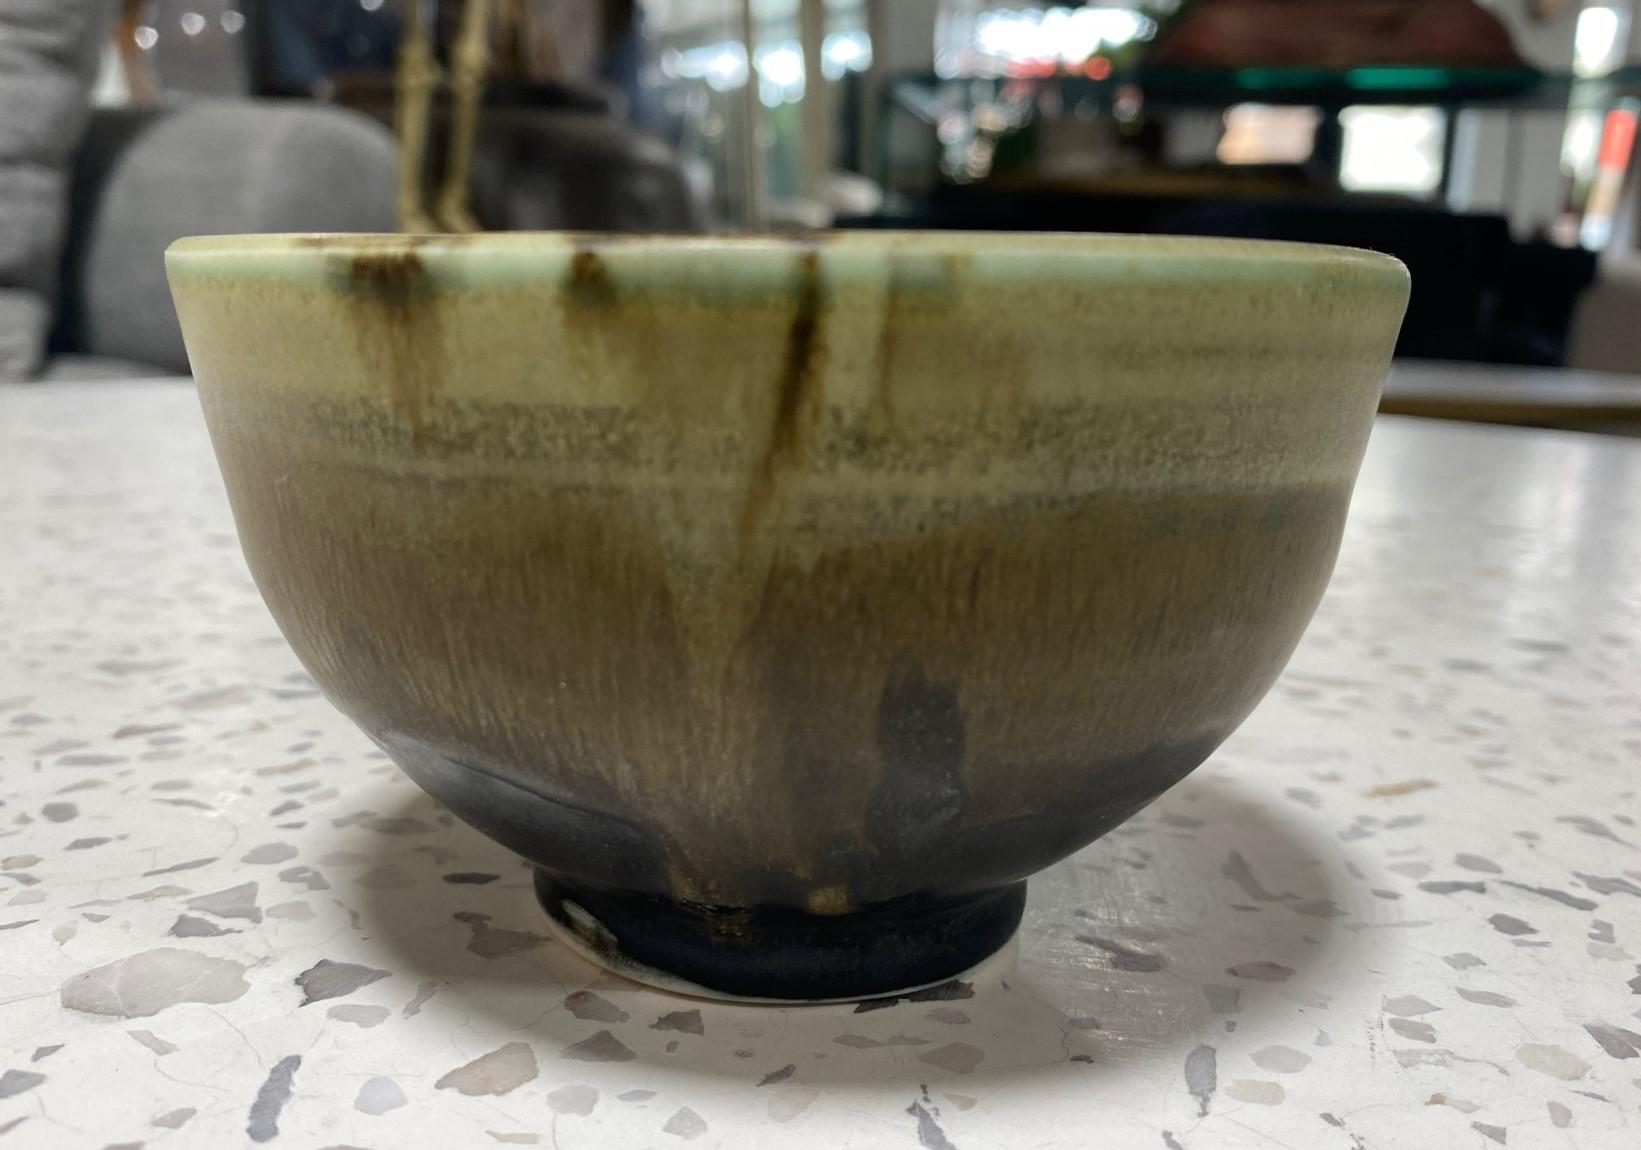 A beautiful and quite engaging Chawan tea bowl by famed Japanese Hawaiian American pottery master Toshiko Takaezu. The fired bowl features a vast array of shifting, vibrant, and colorful glazes (with earth tones of browns, greens,  black, greys, and